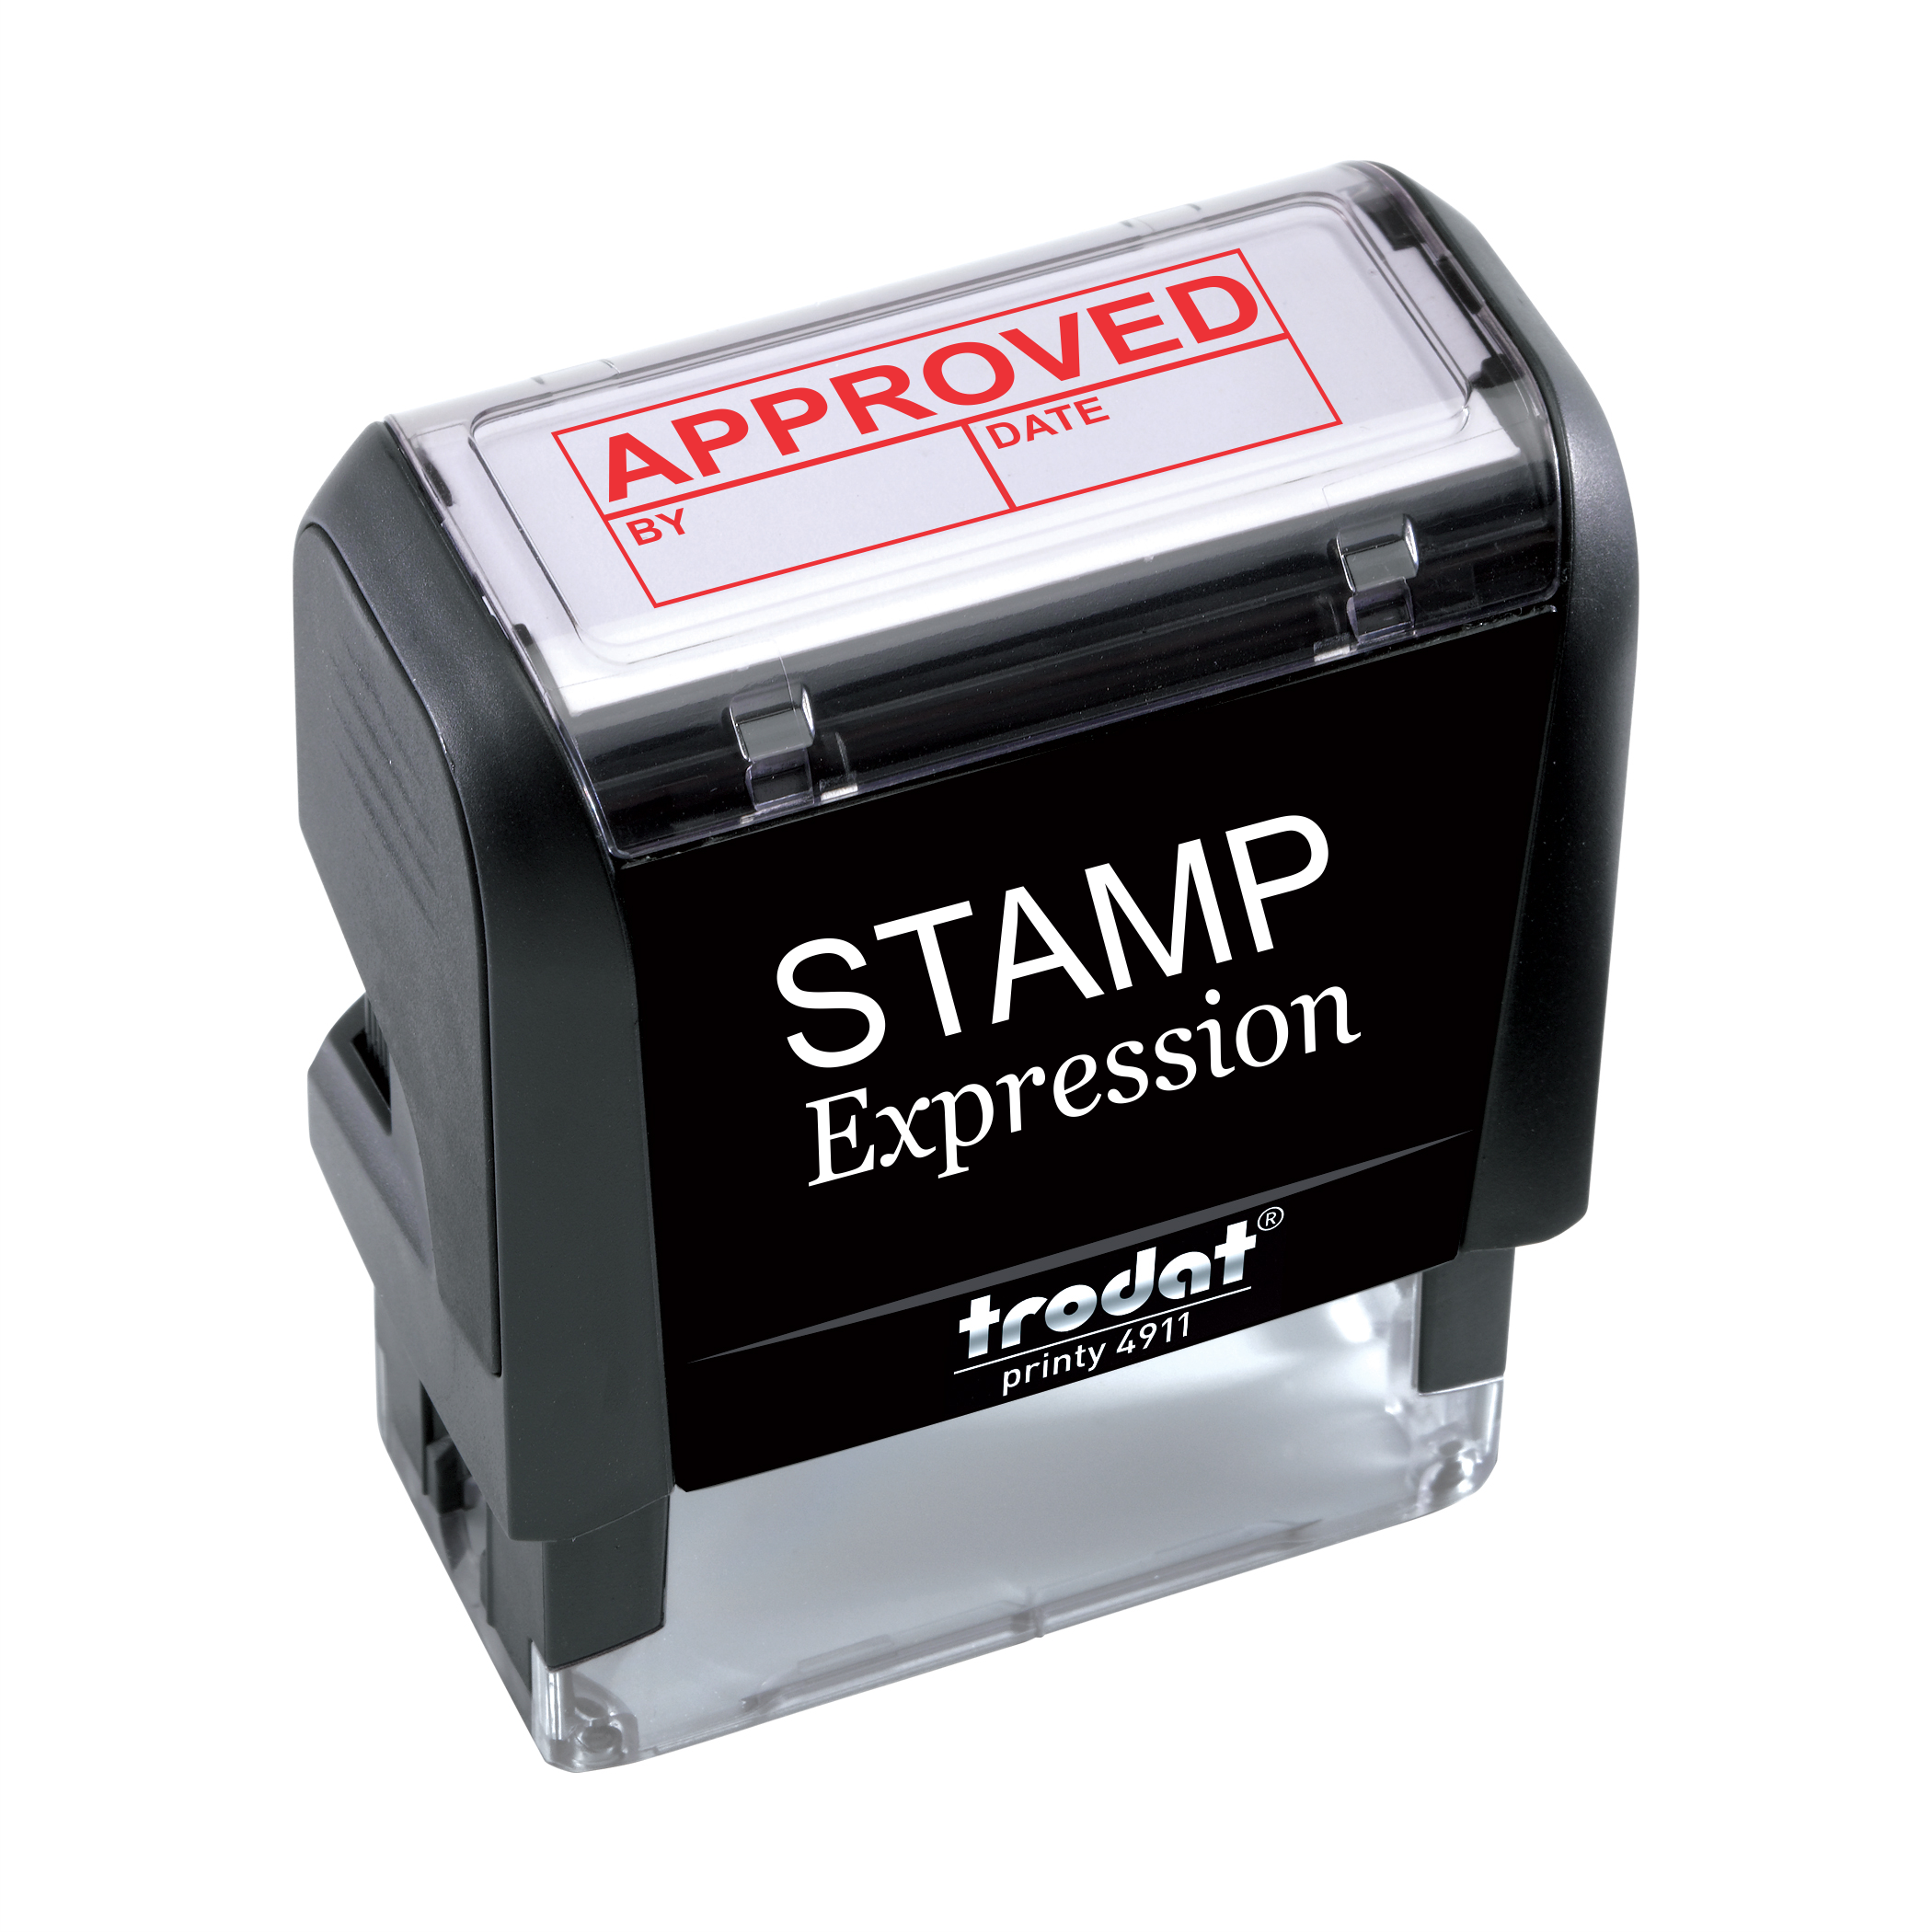 Approved by Date and by Office Self Inking Rubber Stamp